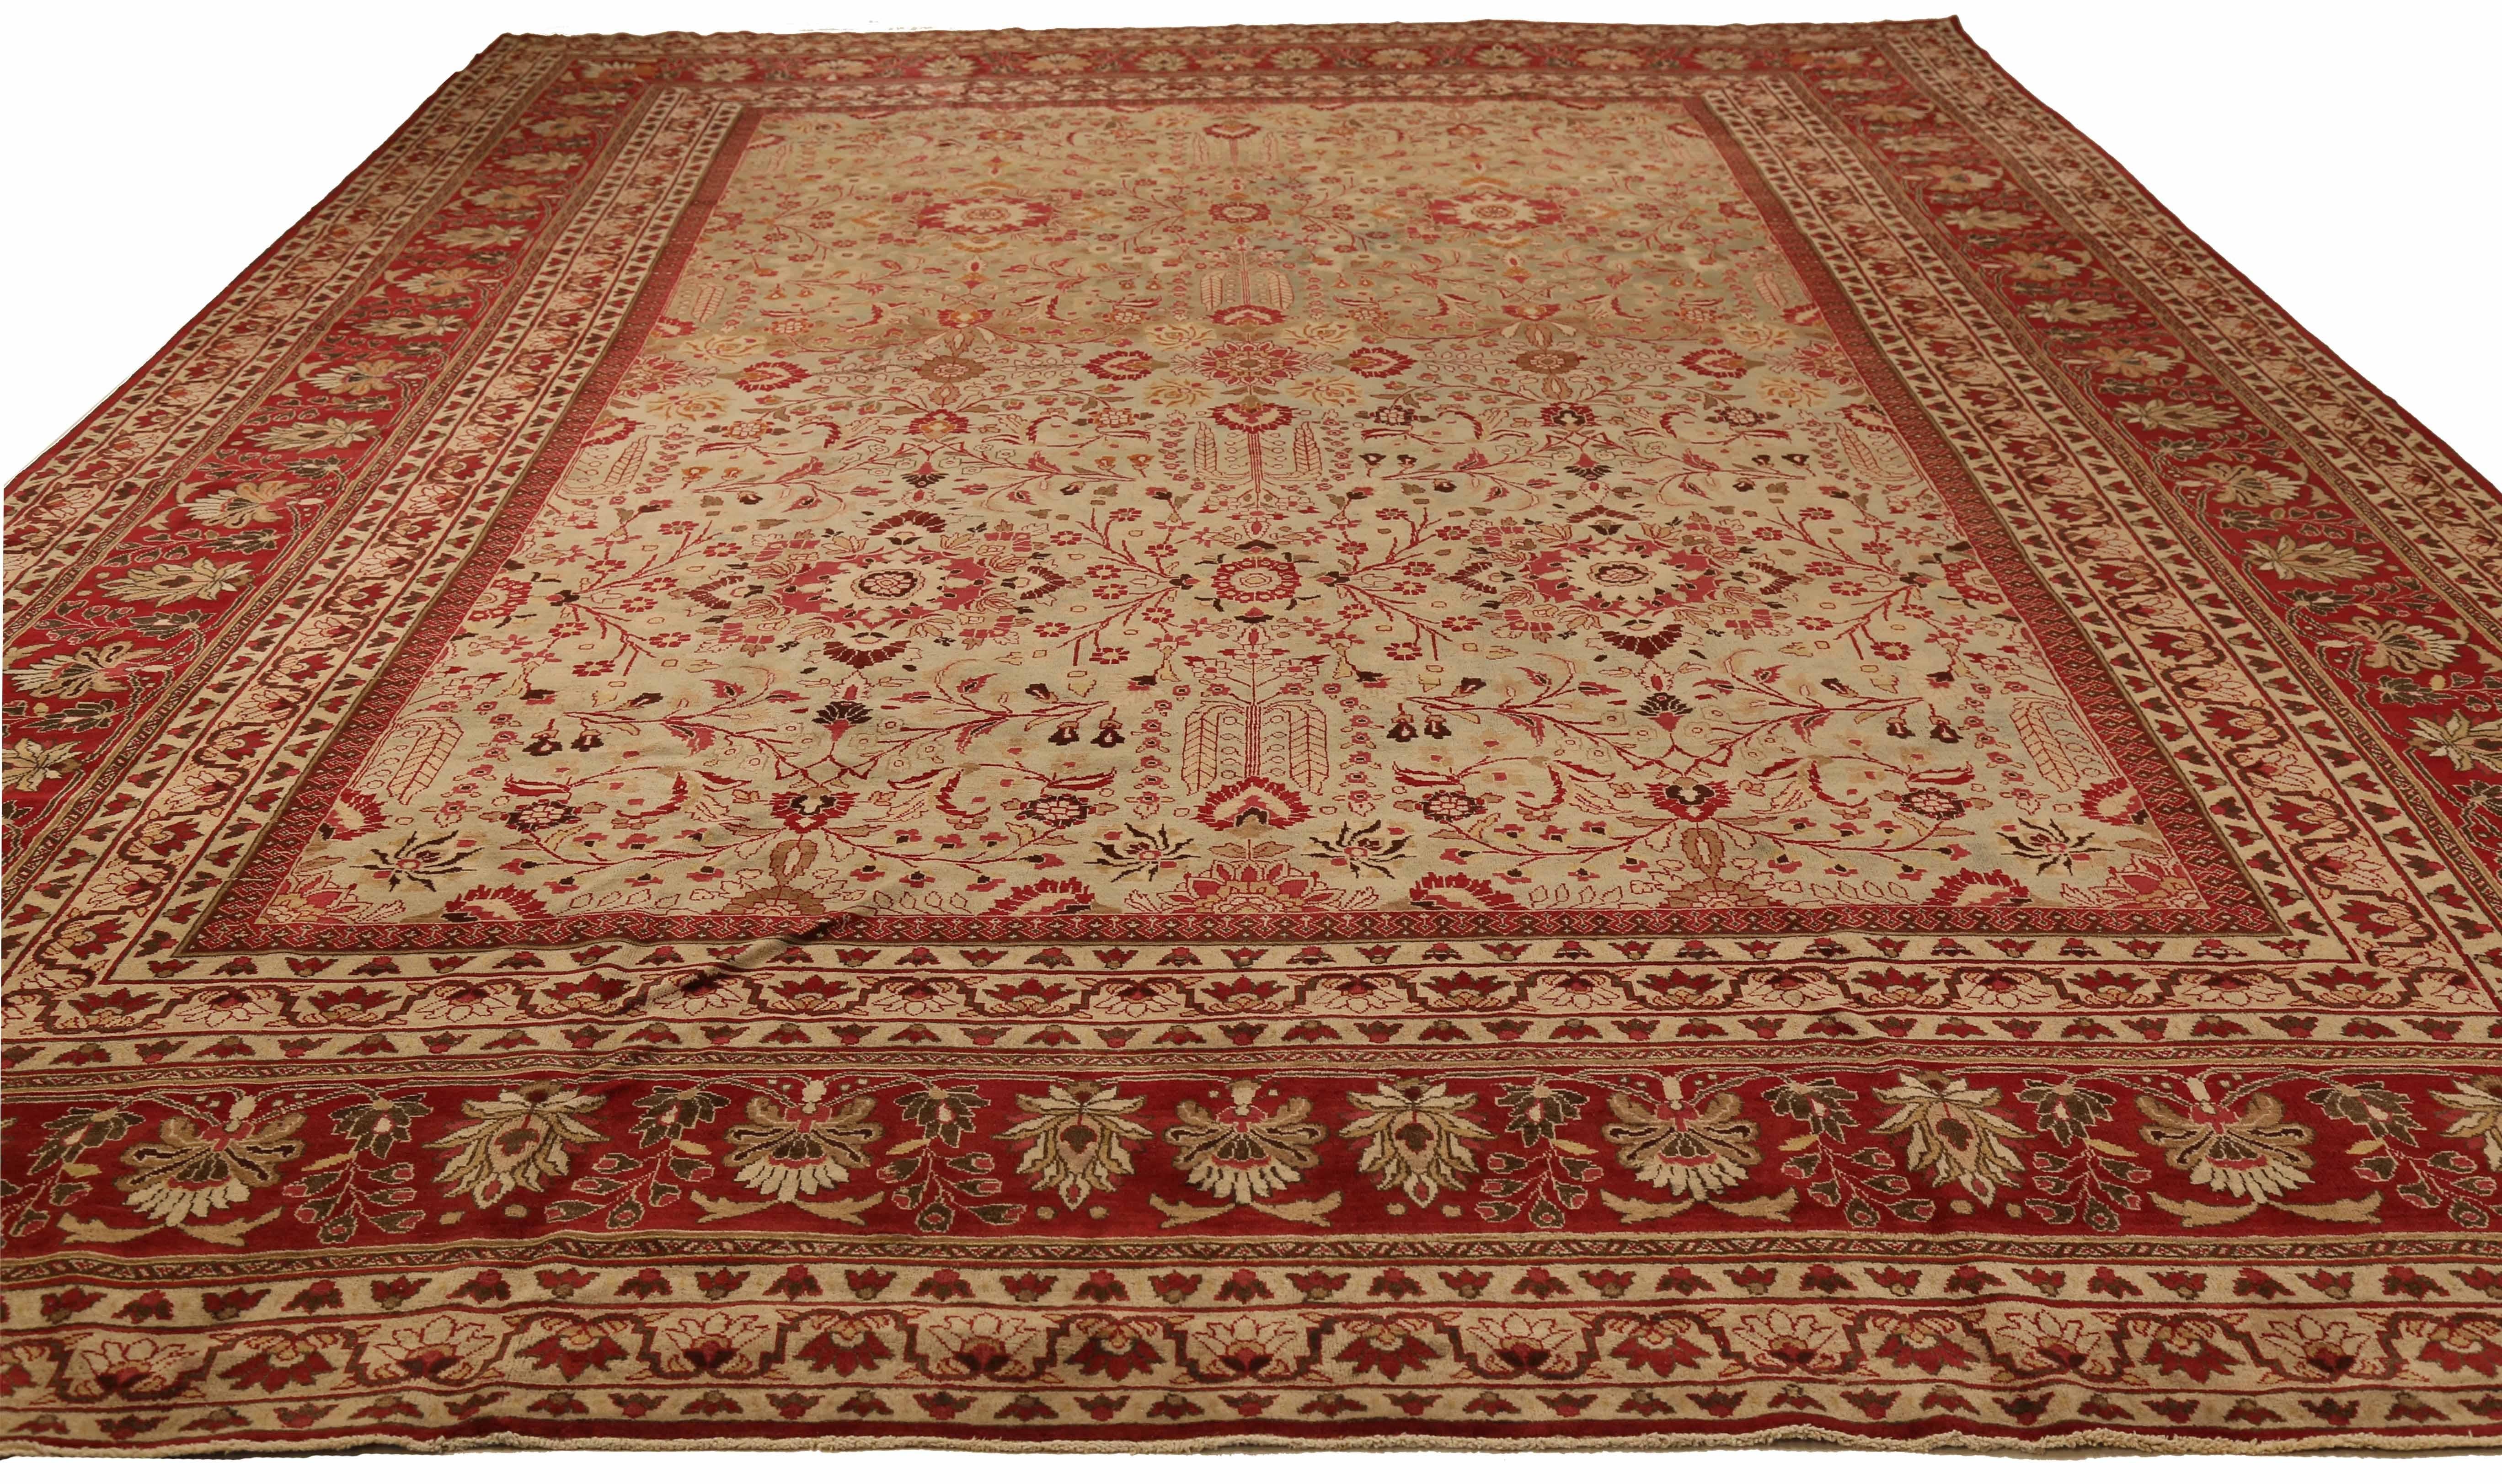 Antique Persian area rug handwoven from the finest sheep’s wool. It’s colored with all-natural vegetable dyes that are safe for humans and pets. It’s a traditional Mashad design handwoven by expert artisans.It’s a lovely area rug that can be